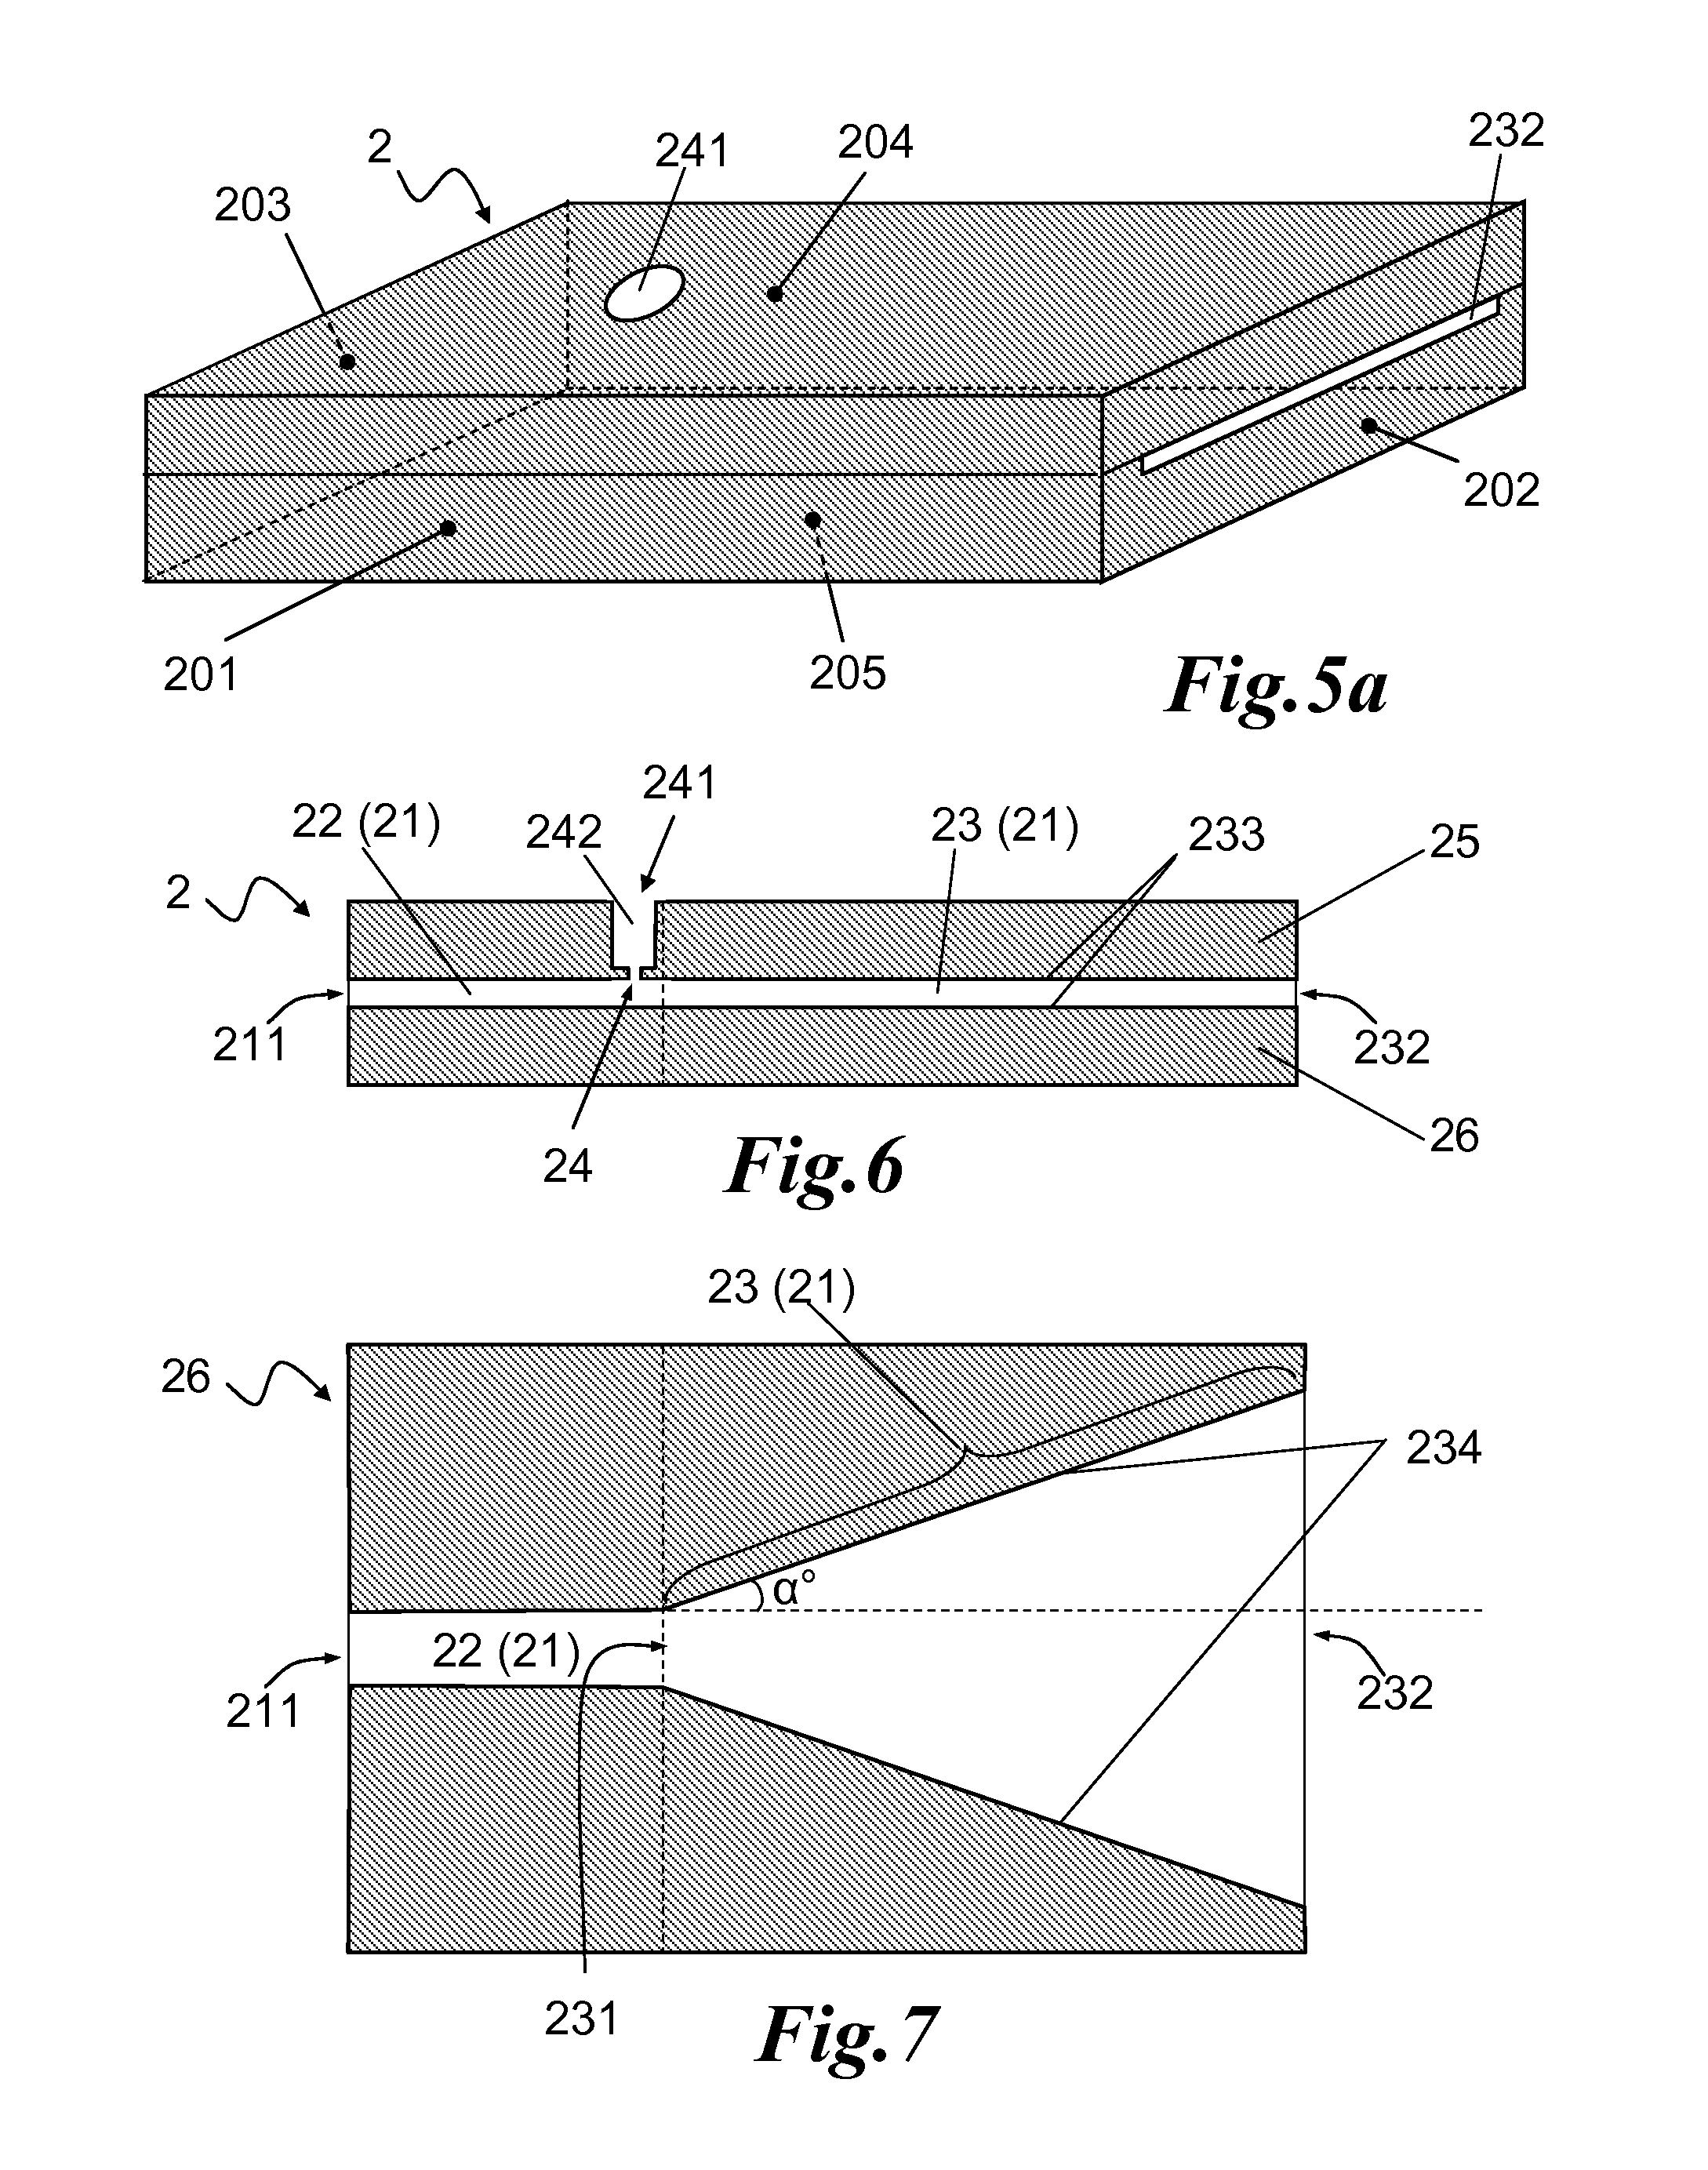 Method and Equipment for Reinforcing a Substance or an Object with Continuous Filaments